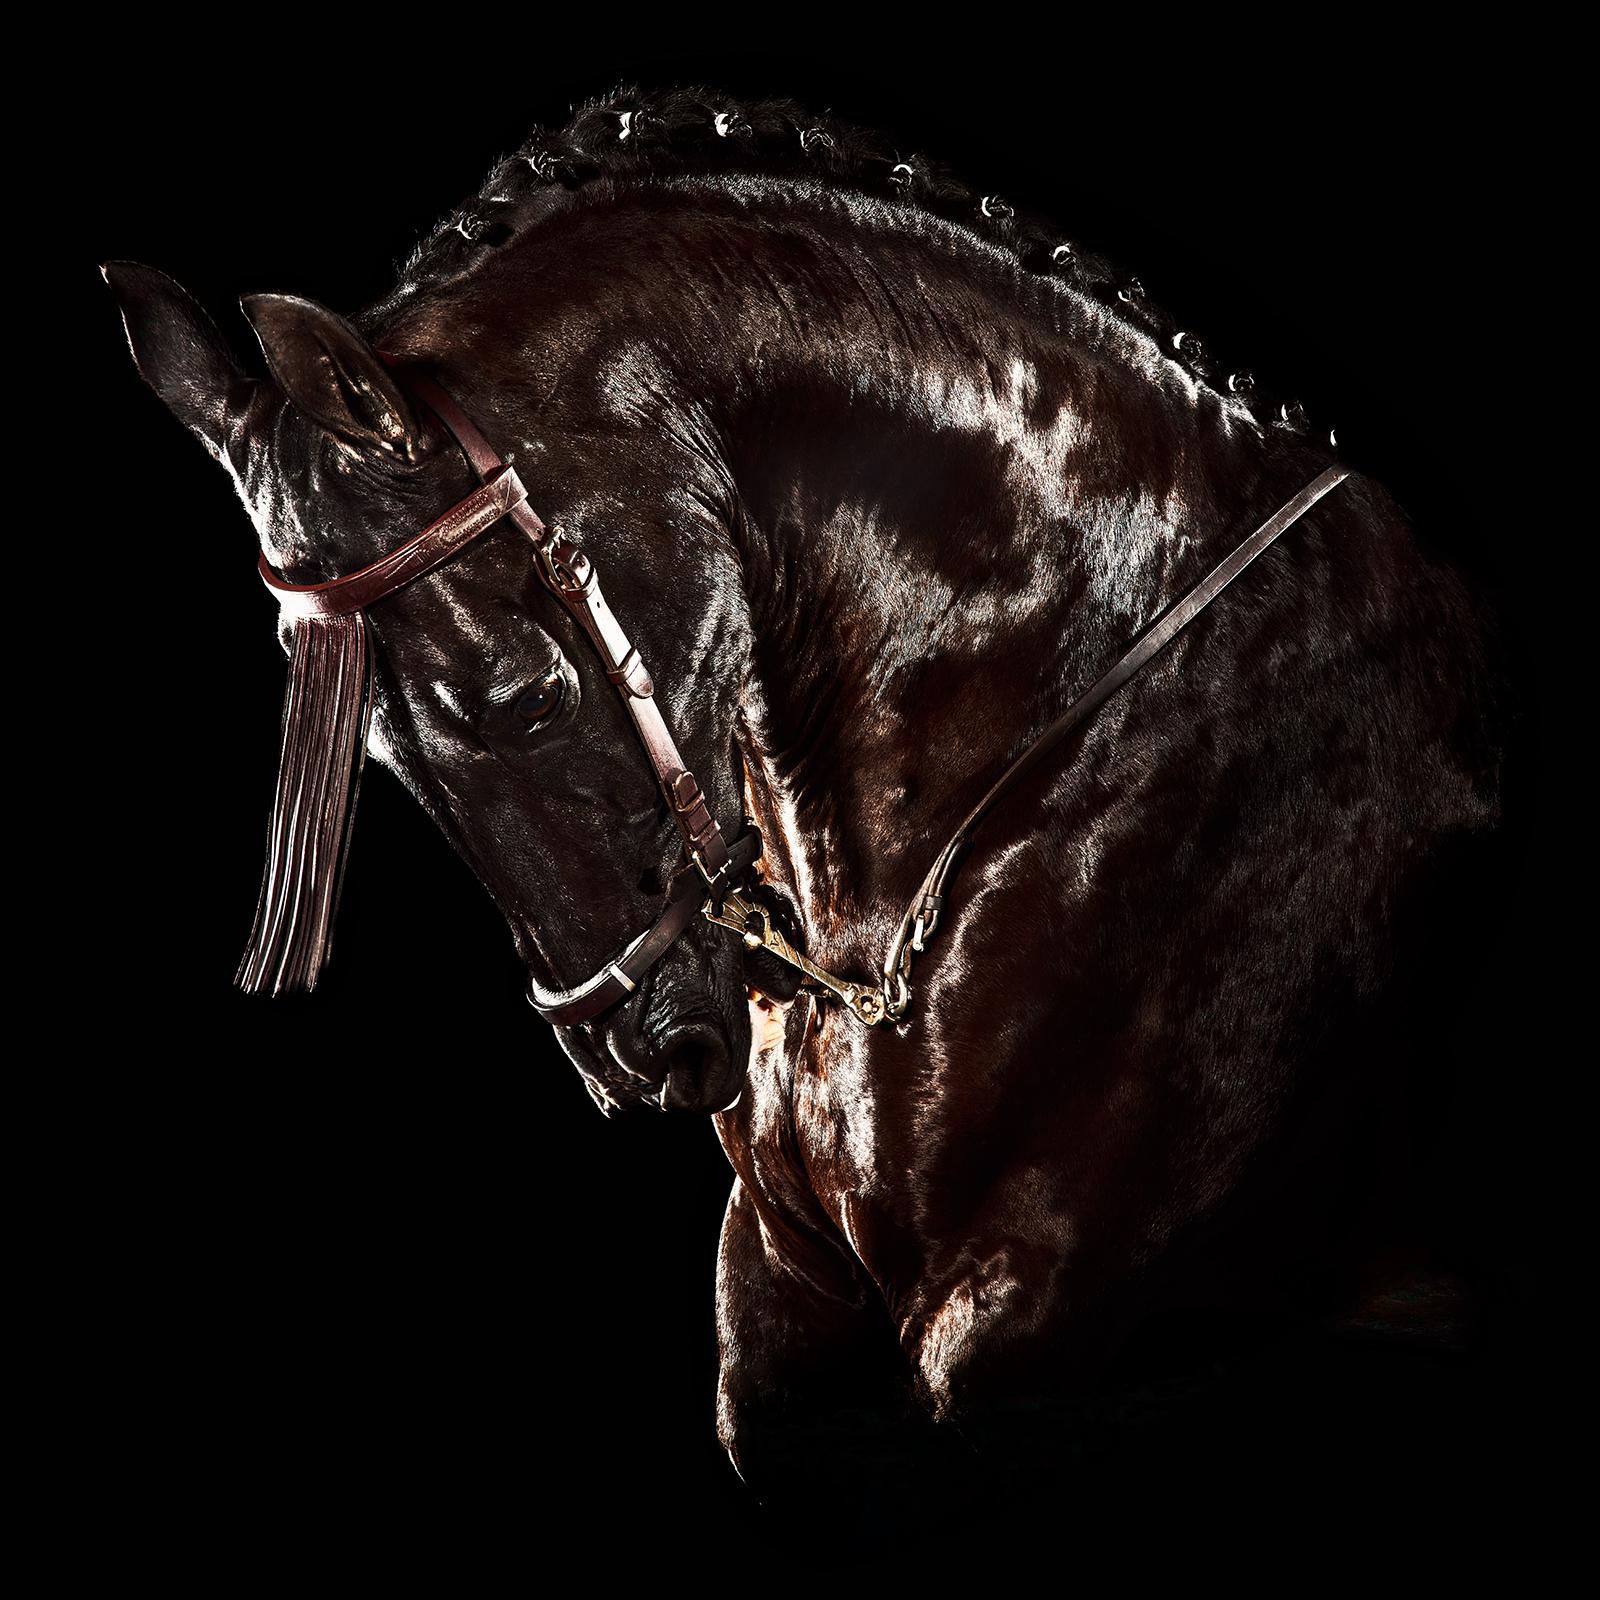  Horse 3- Signed Limited still life print, Animal, Contemporary, Square Portrait - Black Still-Life Photograph by Peter Ridge